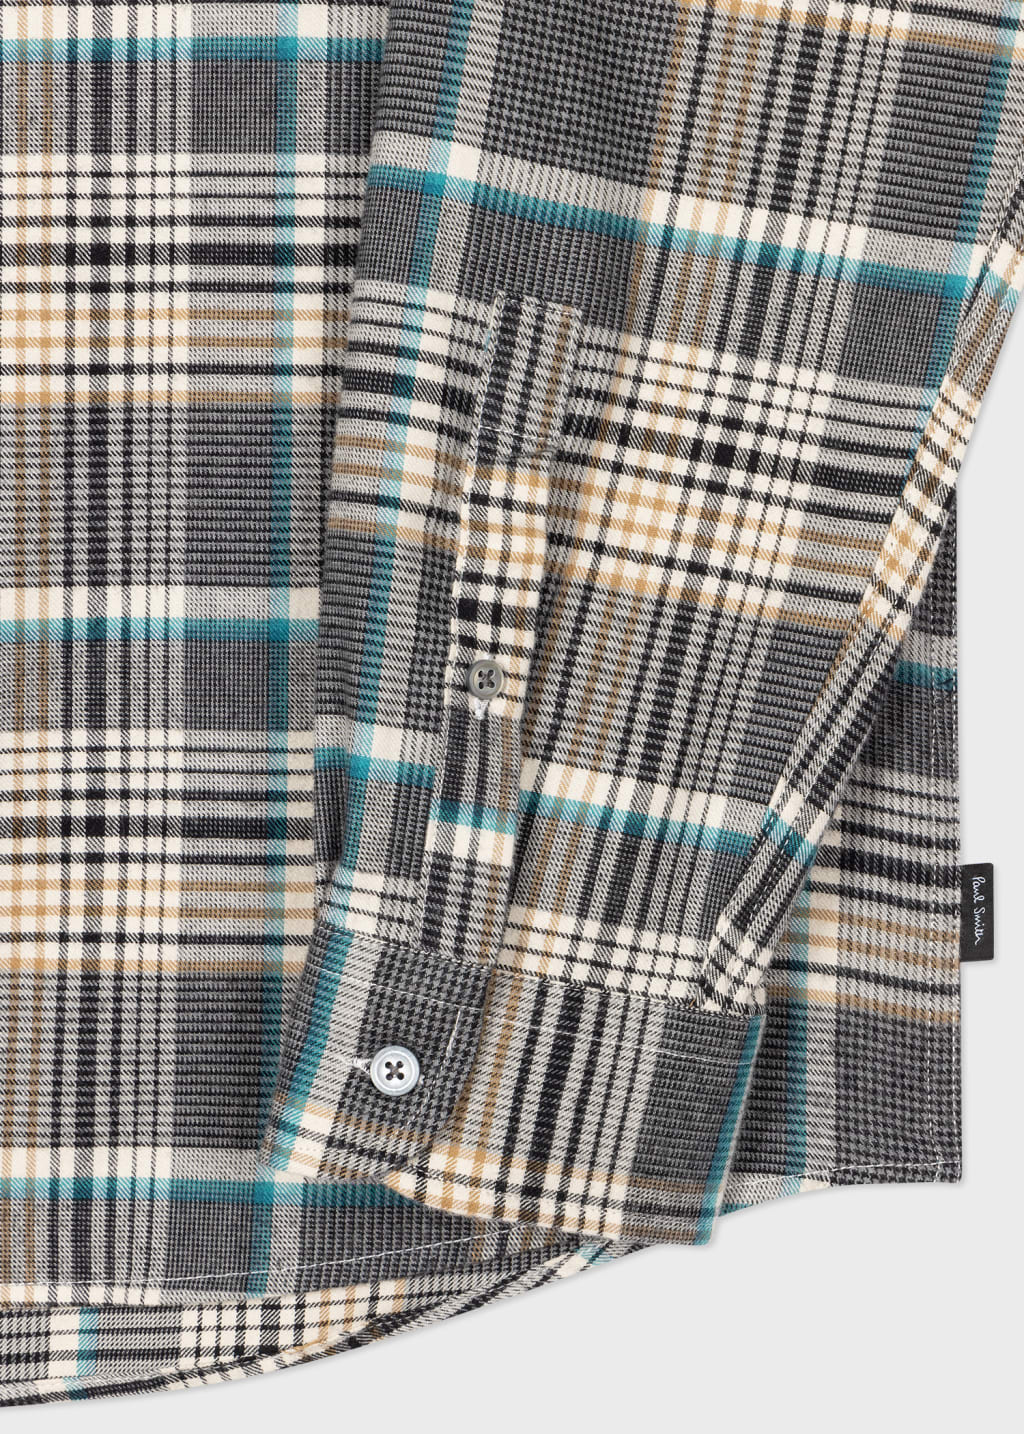 Detail View - Grey Check Double Pocket Shirt Paul Smith